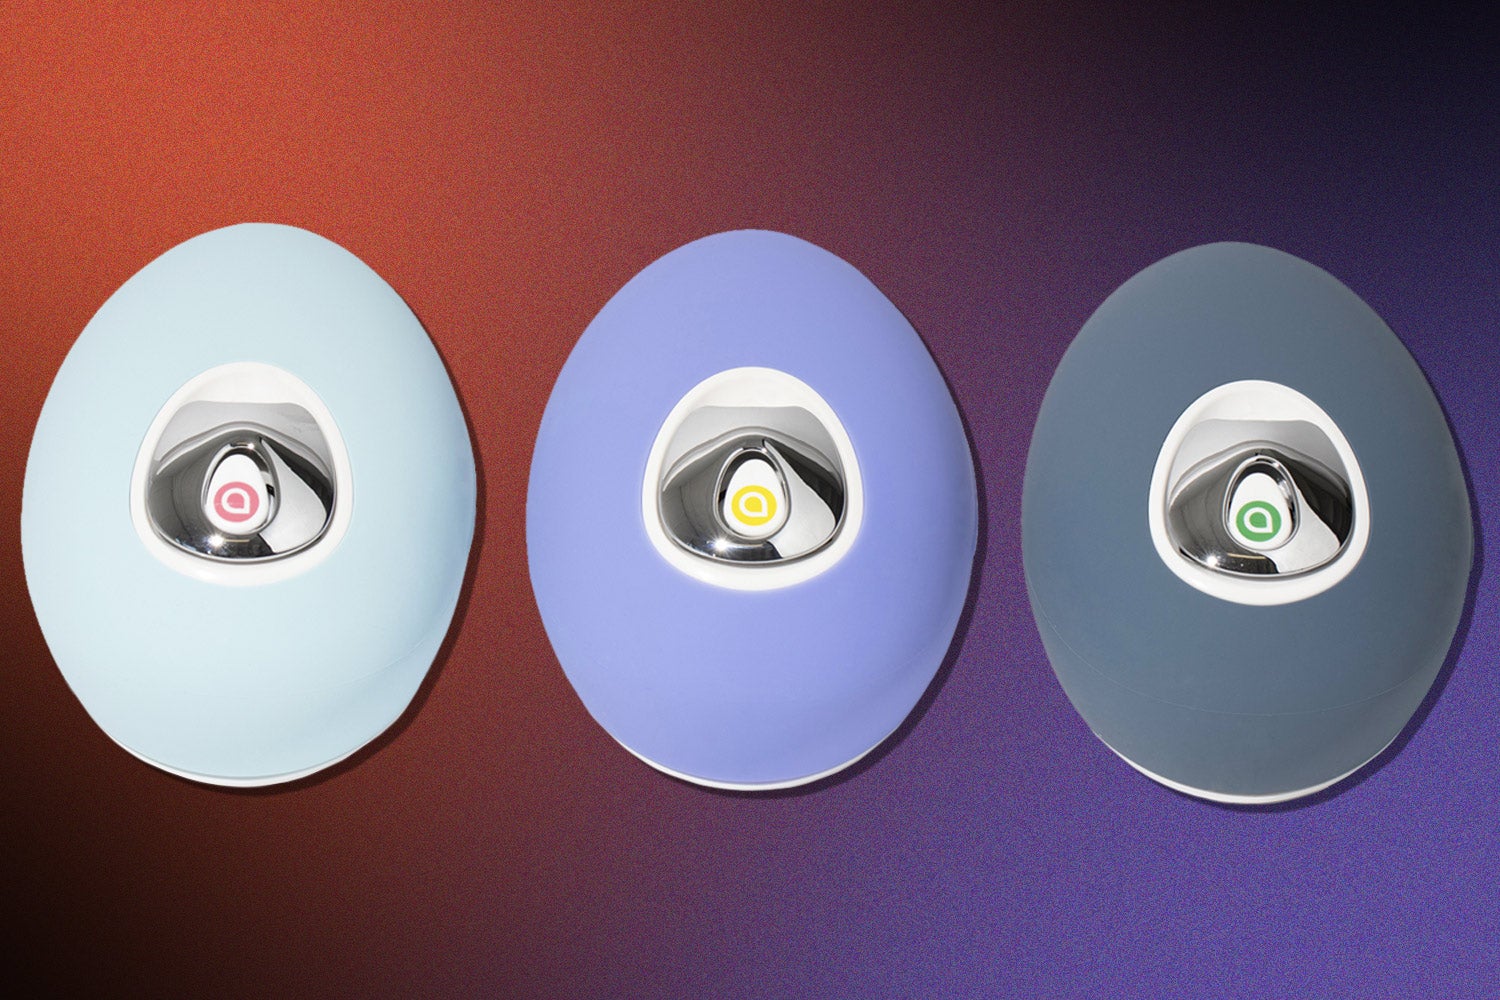 three round devices with silver buttons